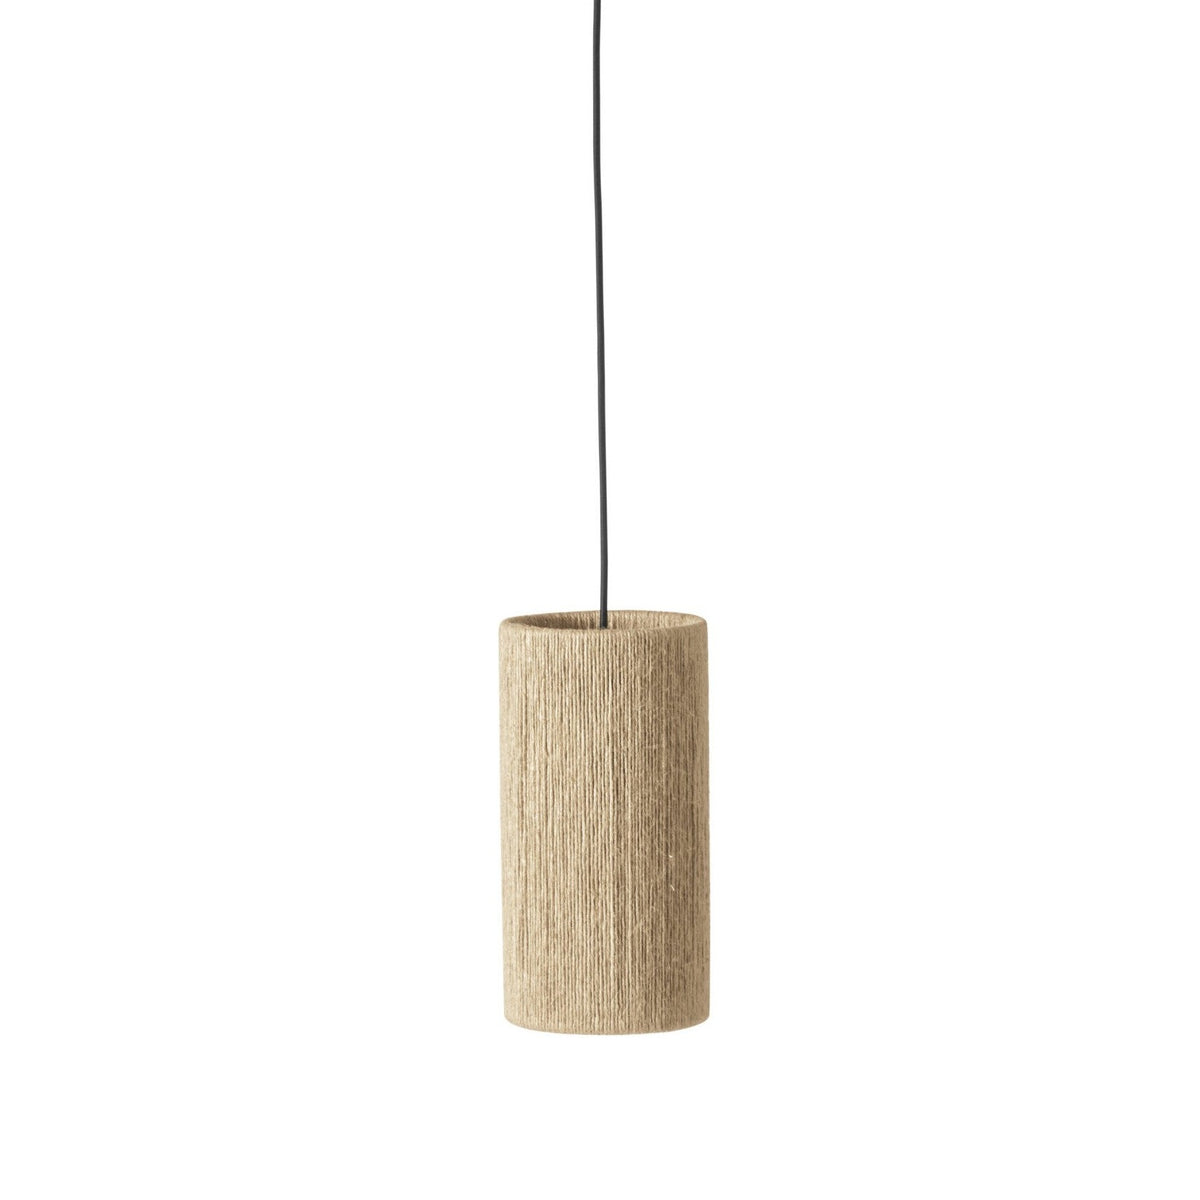 Made by Hand  RO Pendant Lamp 15